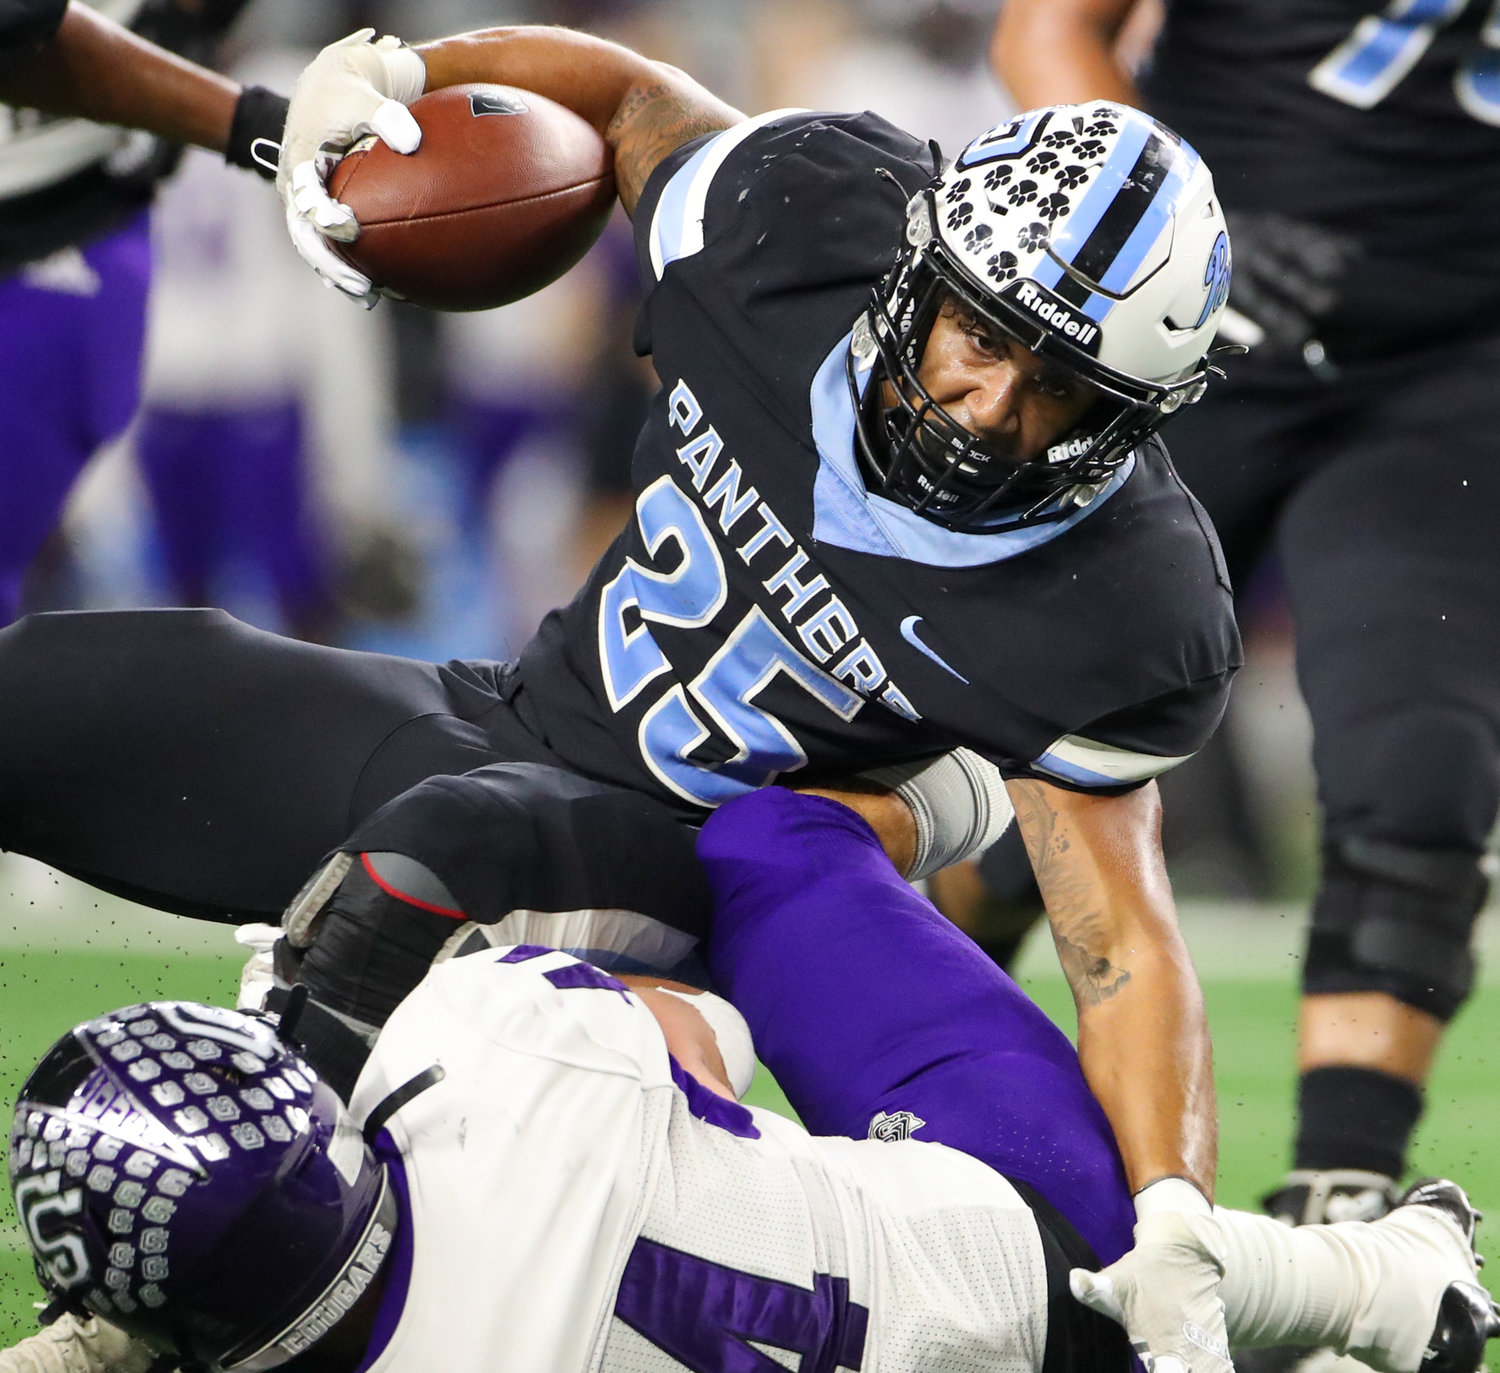 Paetow Panthers running back Jacob Brown (25) is tackled on a carry during the Class 5A Division I state football championship game between Paetow and College Station on December 17, 2021 in Arlington, Texas.